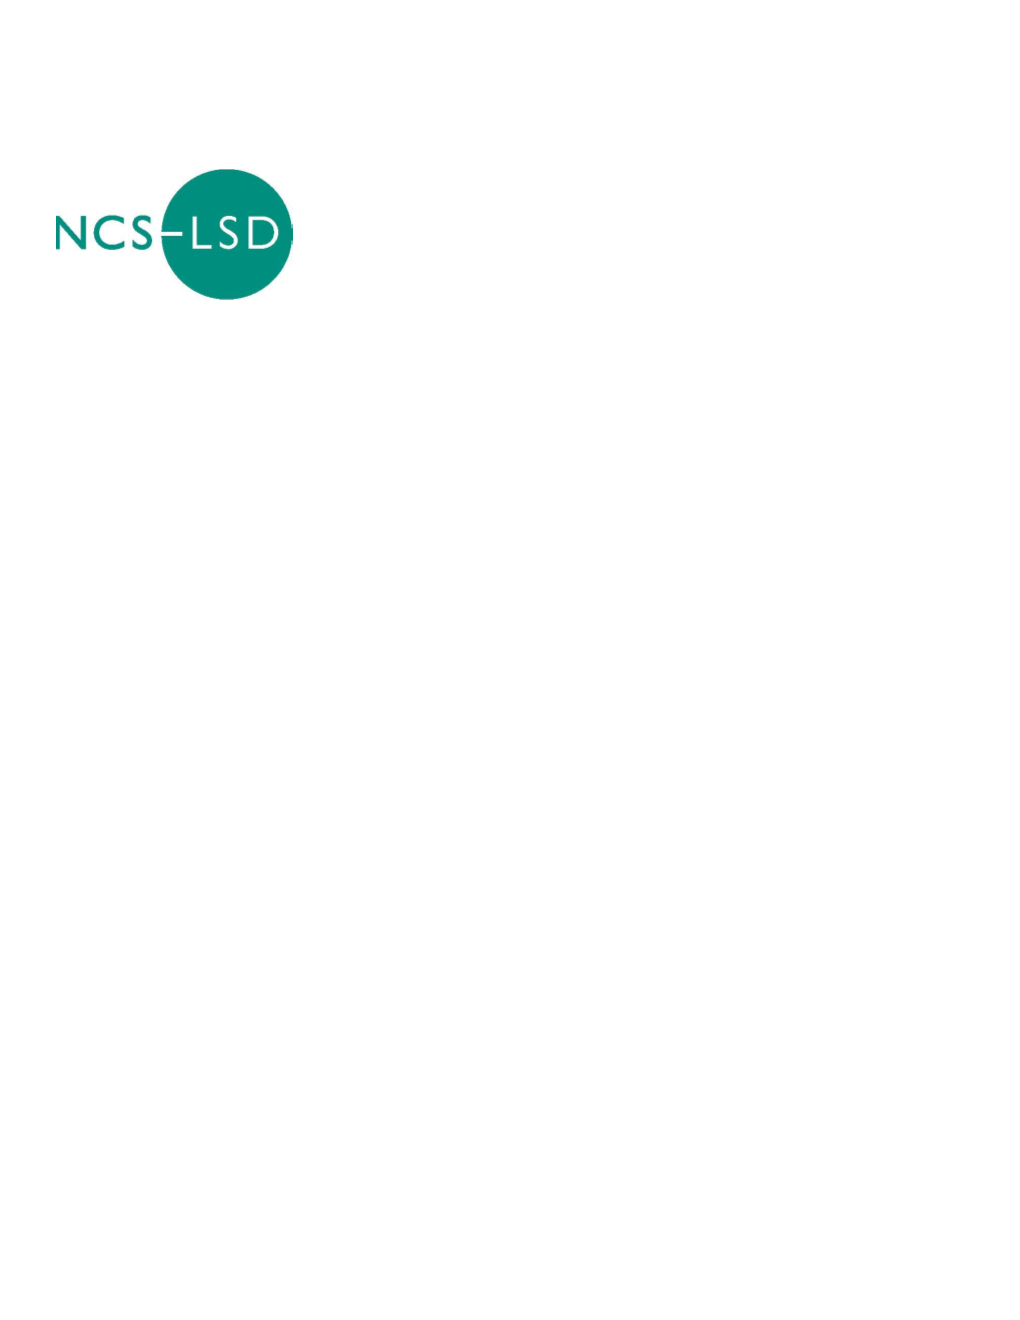 Summary of the National Collaborative Study for Lysosomal Storage Disorders (NCS-LSD) For